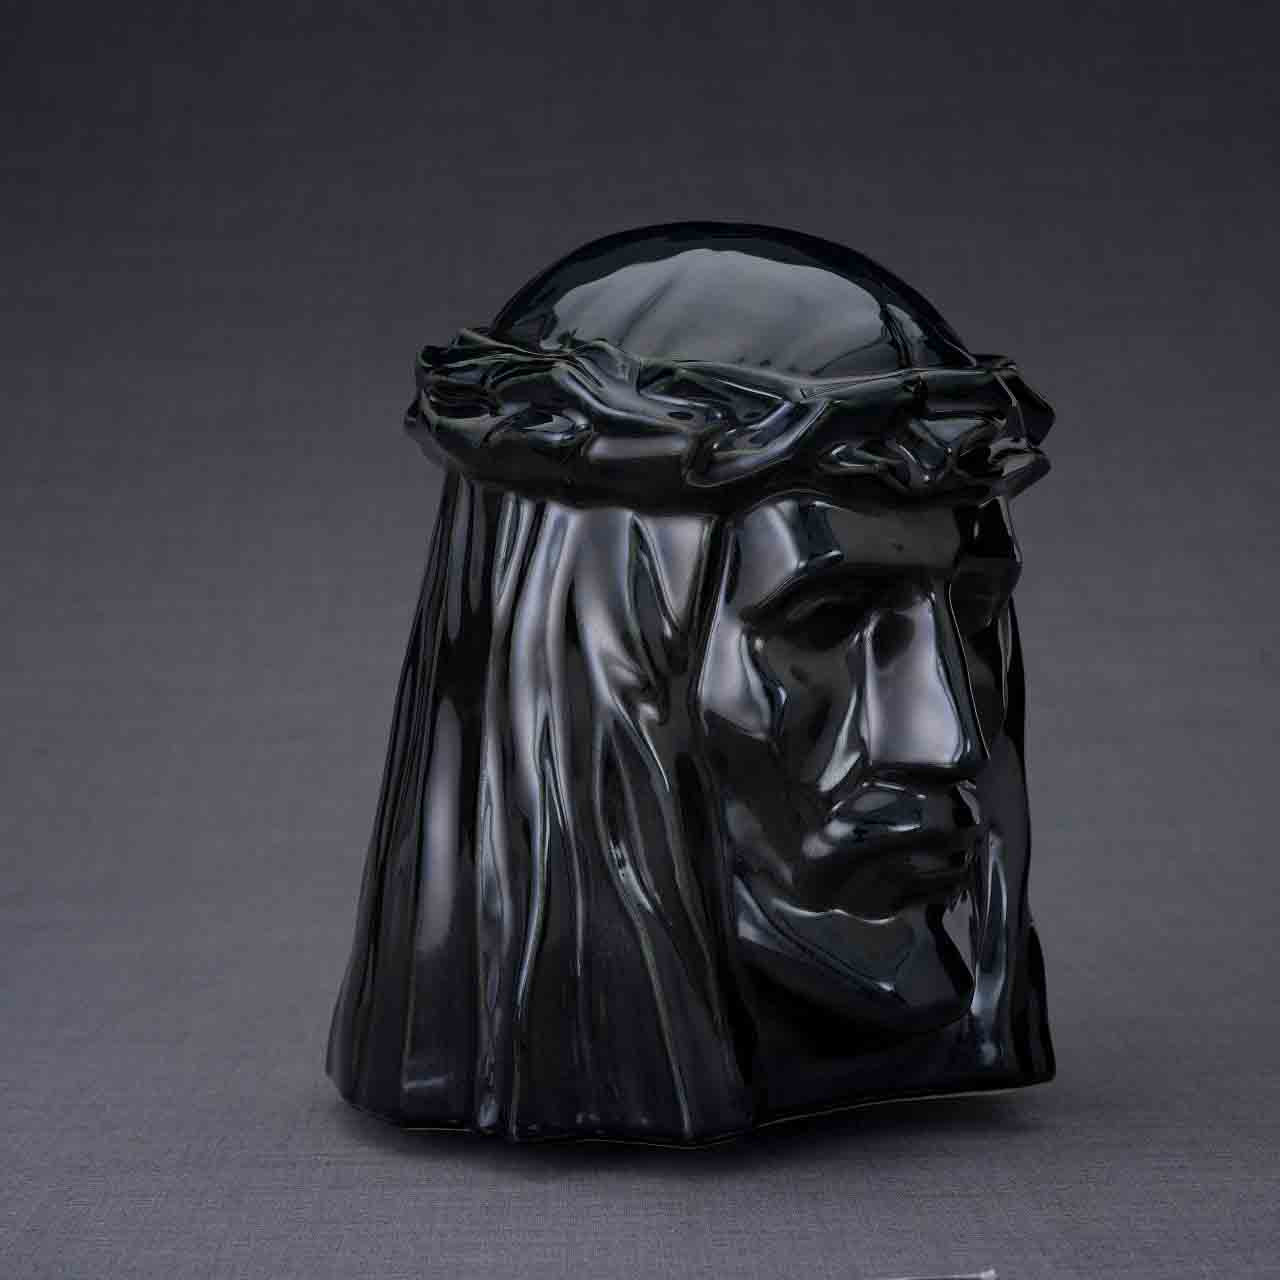 The Christ Cremation Urn for Ashes in Glossy Black Turned Right Dark Background